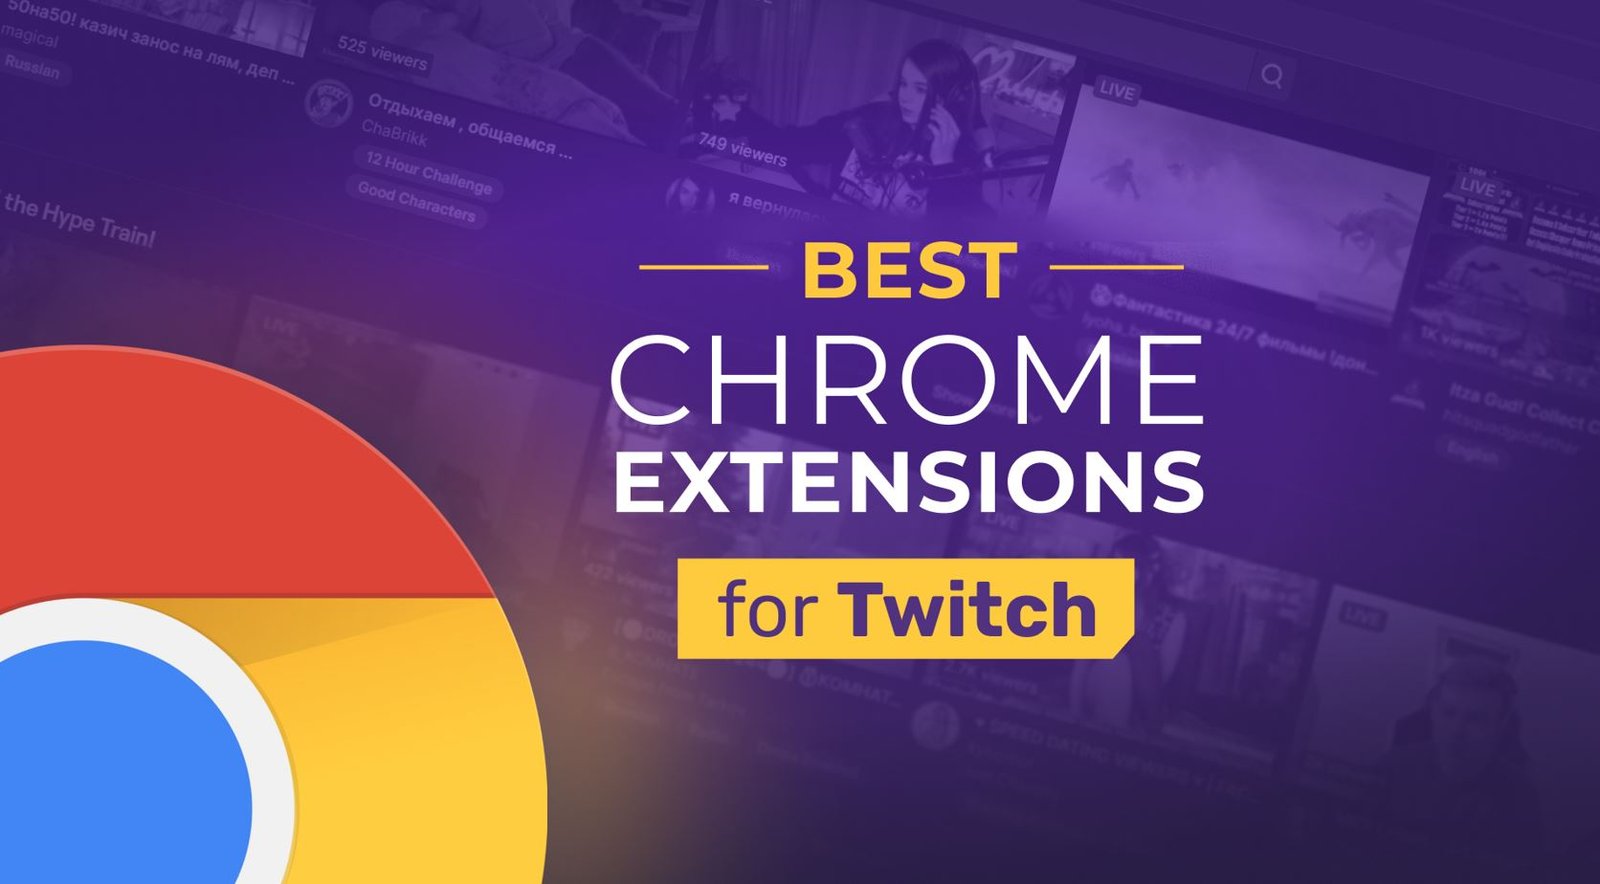 Chrome extensions for Twitch